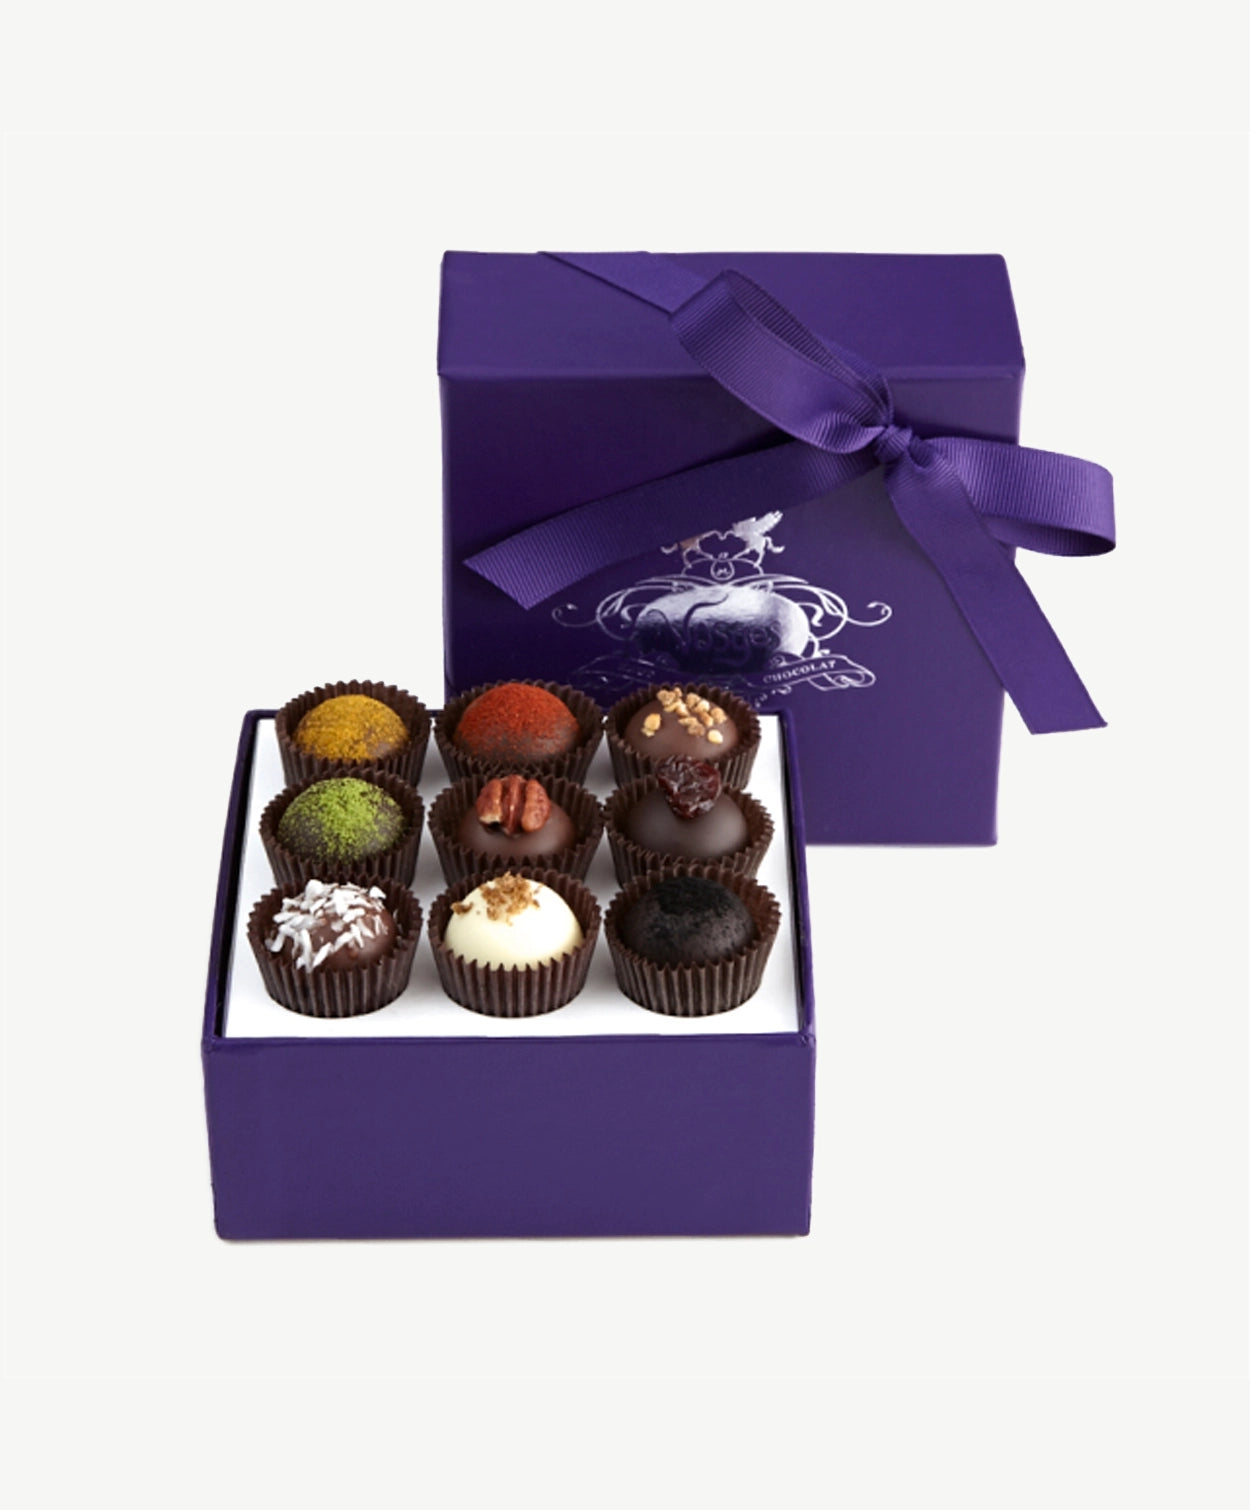 Purple box of Vosges haut-chocolat exotic truffles, lid standing upright, displaying nine chocolate truffles adorned in brightly colored spices and toppings tied with a purple ribbon bow on a white background.